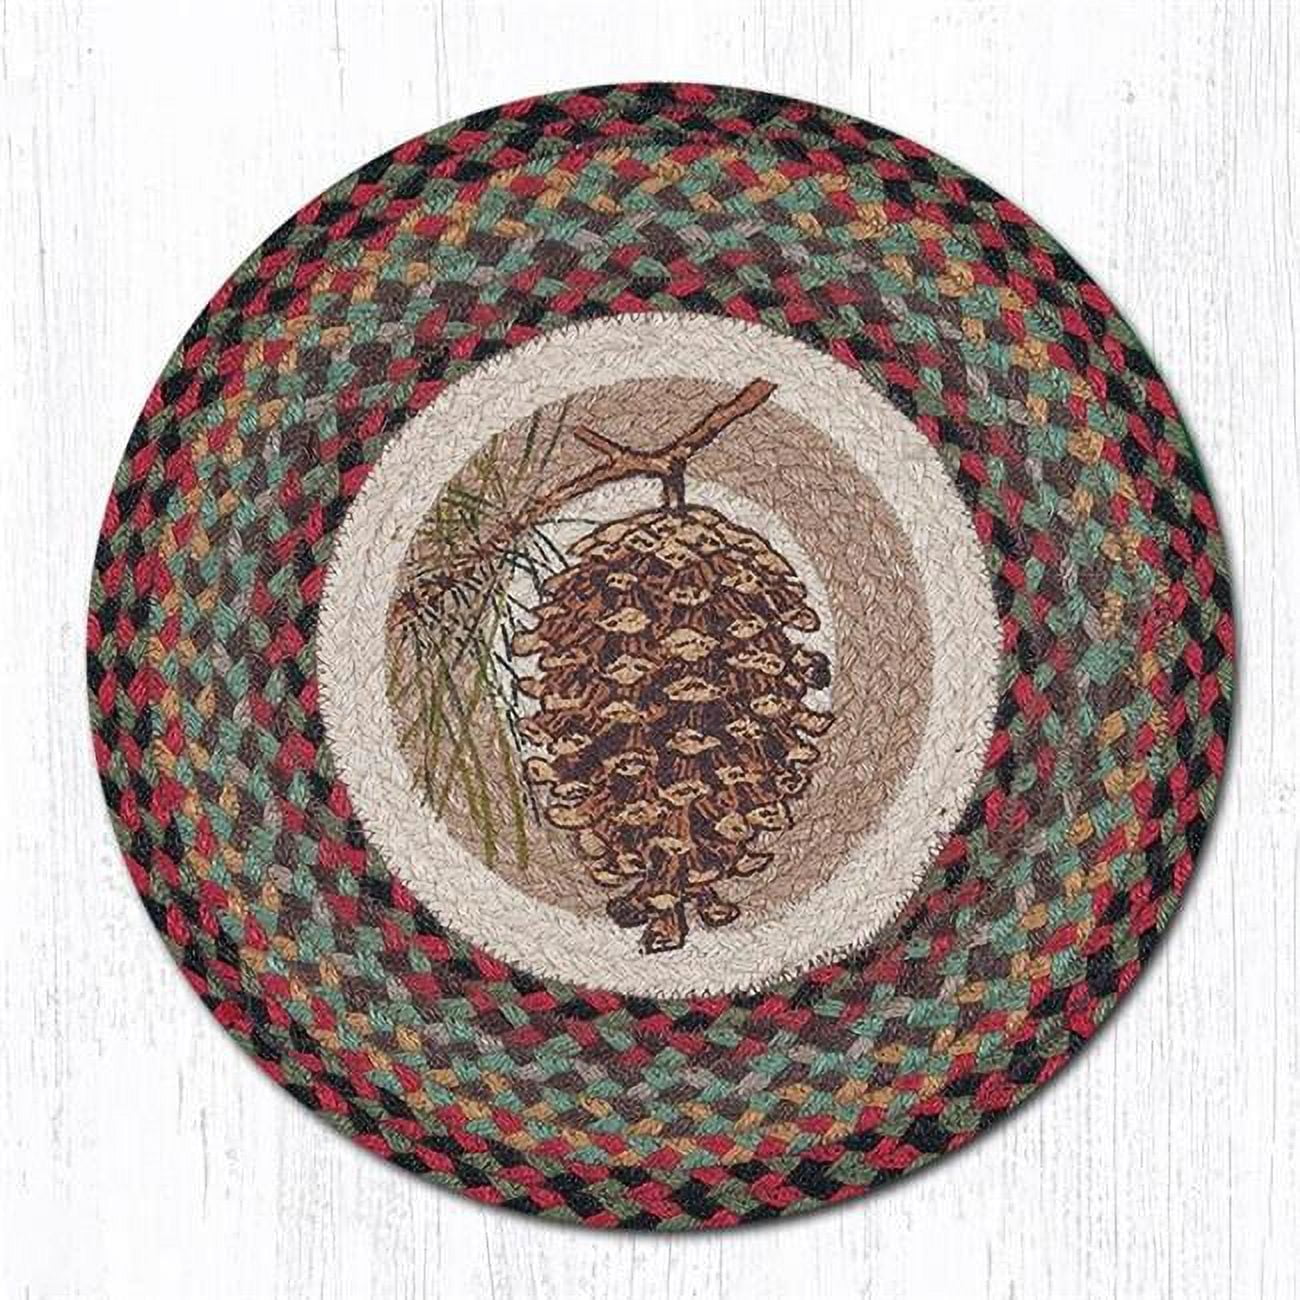 15.5 X 15.5 In. Pinecone Printed Round Chair Pad